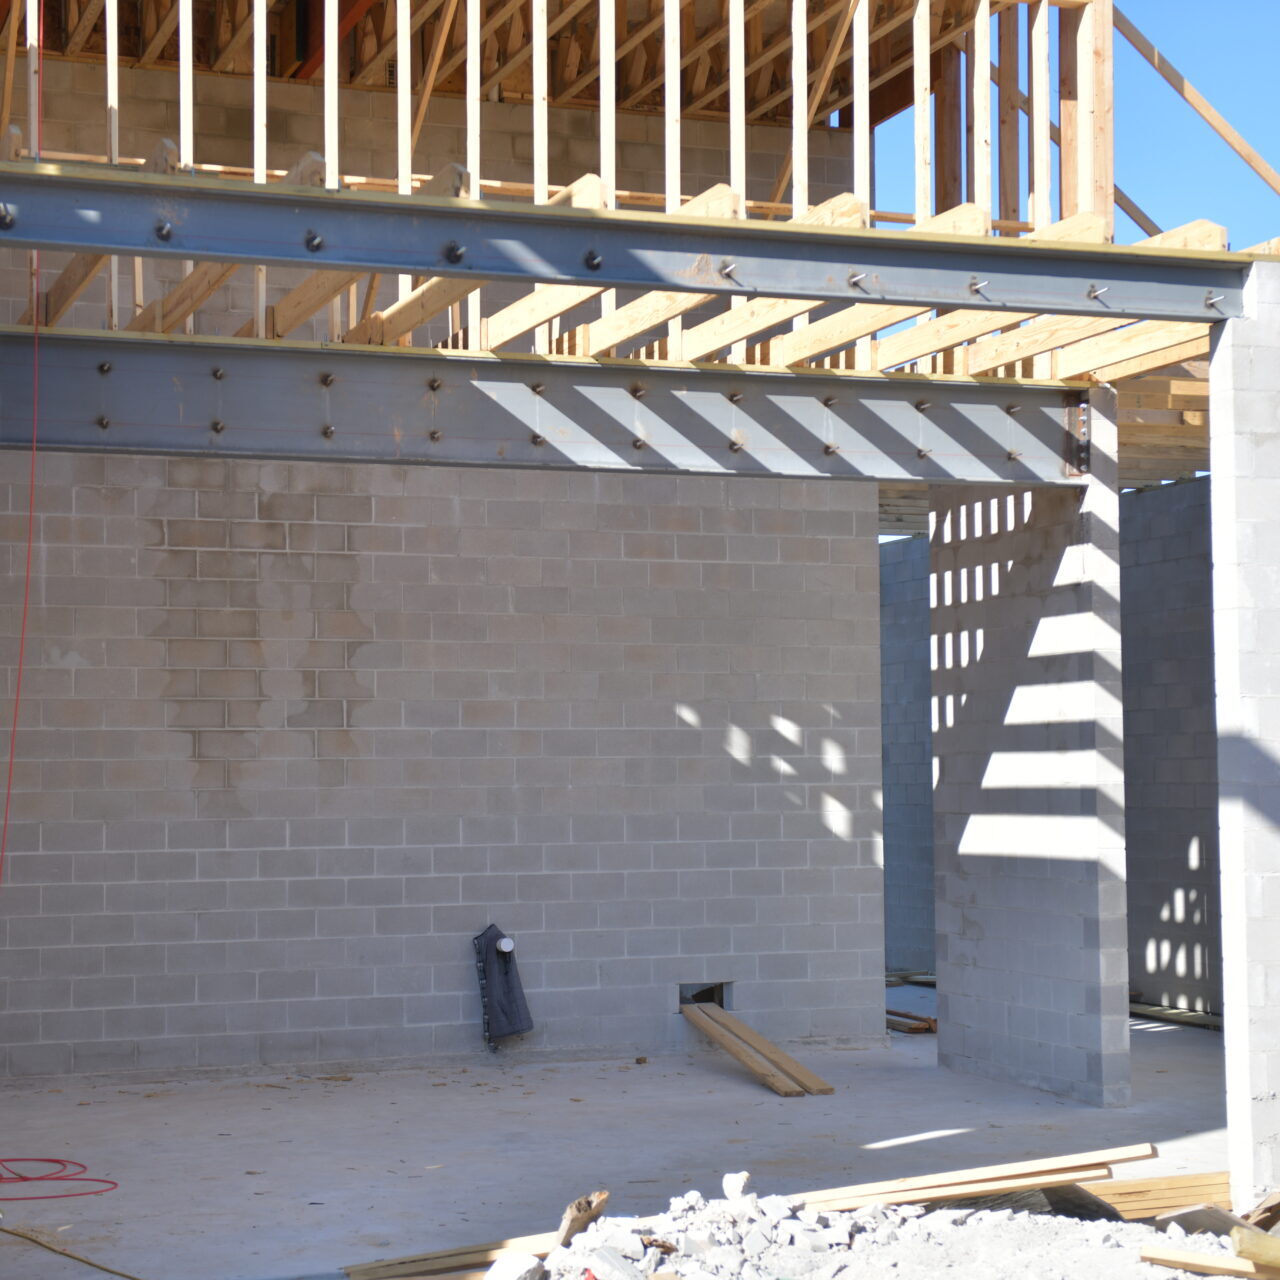 A house under construction with concrete beams and beams.